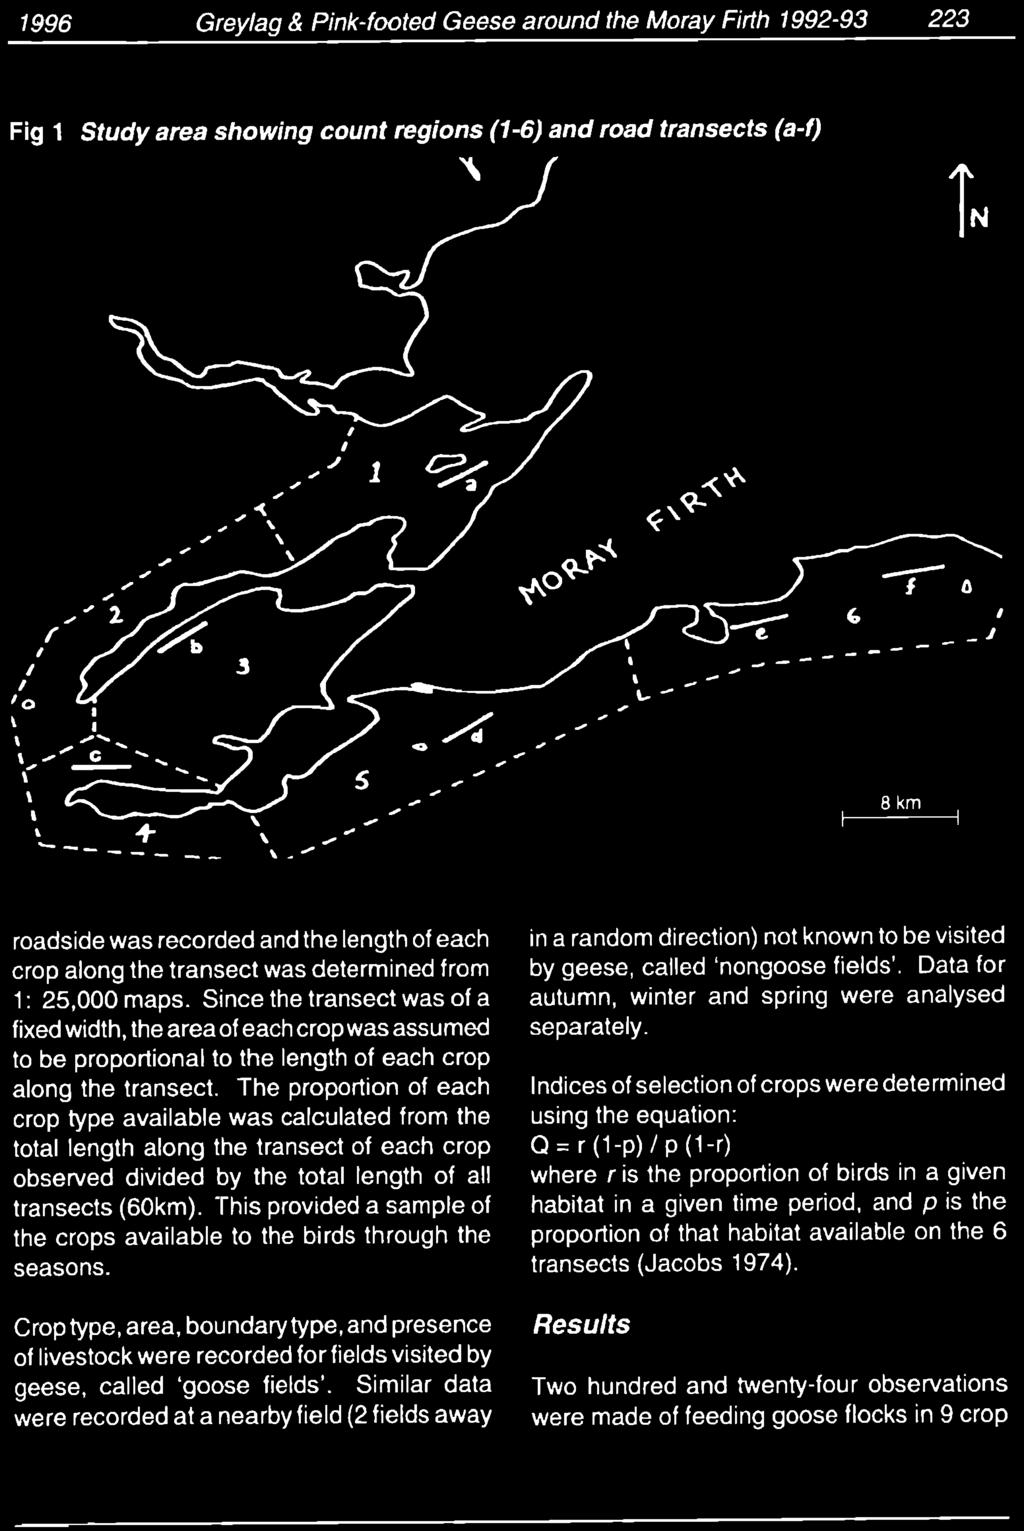 1996 Grey/ag & Pink-footed Geese around the Moray Firth 1992-93 223 Fig 1 Study area showing count regions (1-6) and road transects (a-f), I, ' I,.," 2-.,.,.... (., _-----1 ---, + '-----, \.., -.